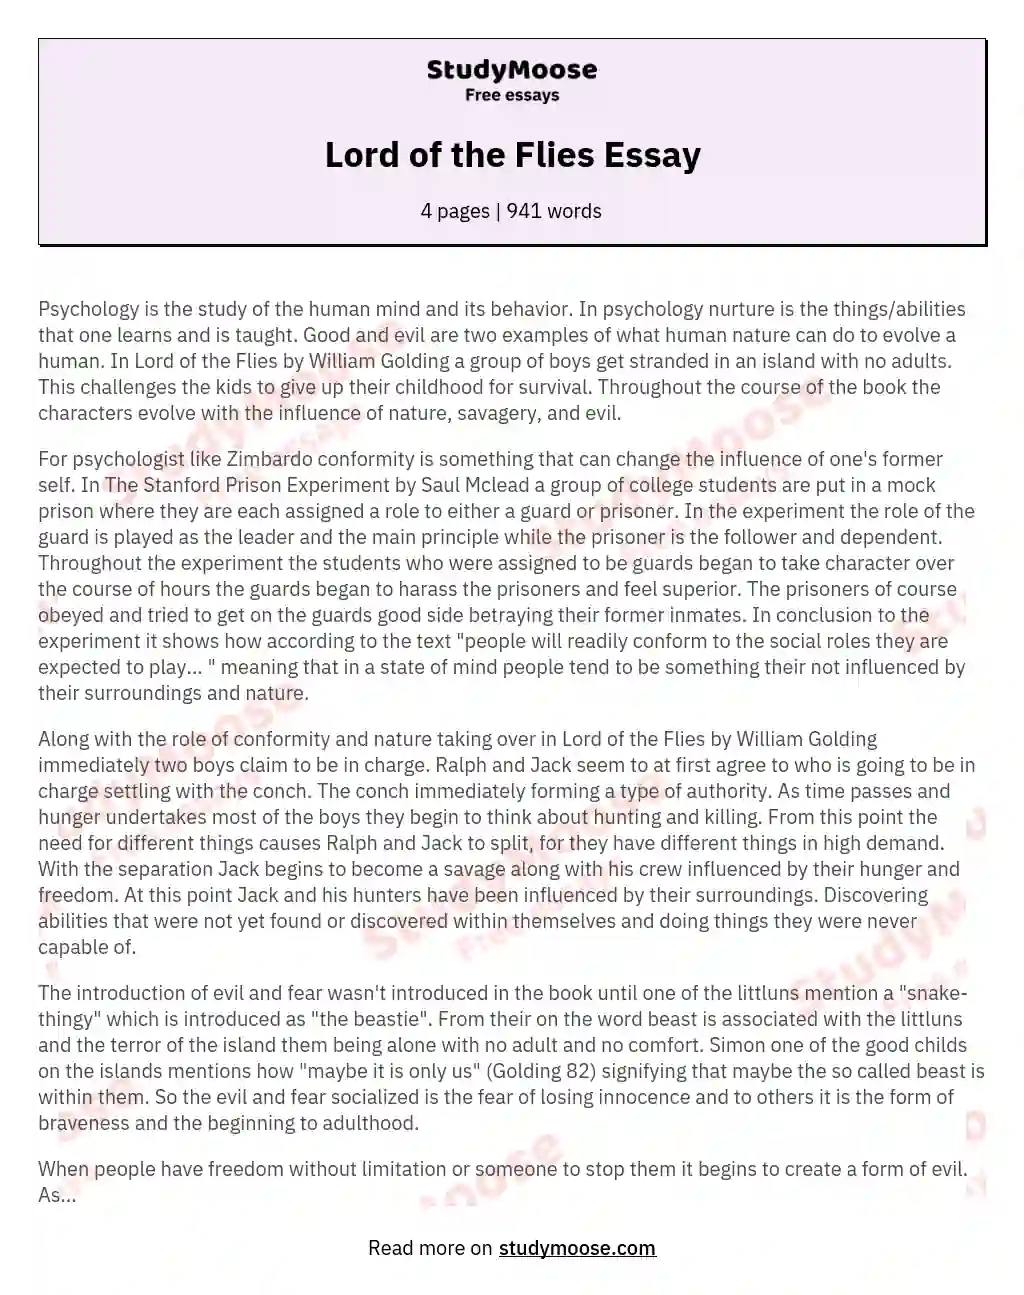 Lord of the Flies Essay